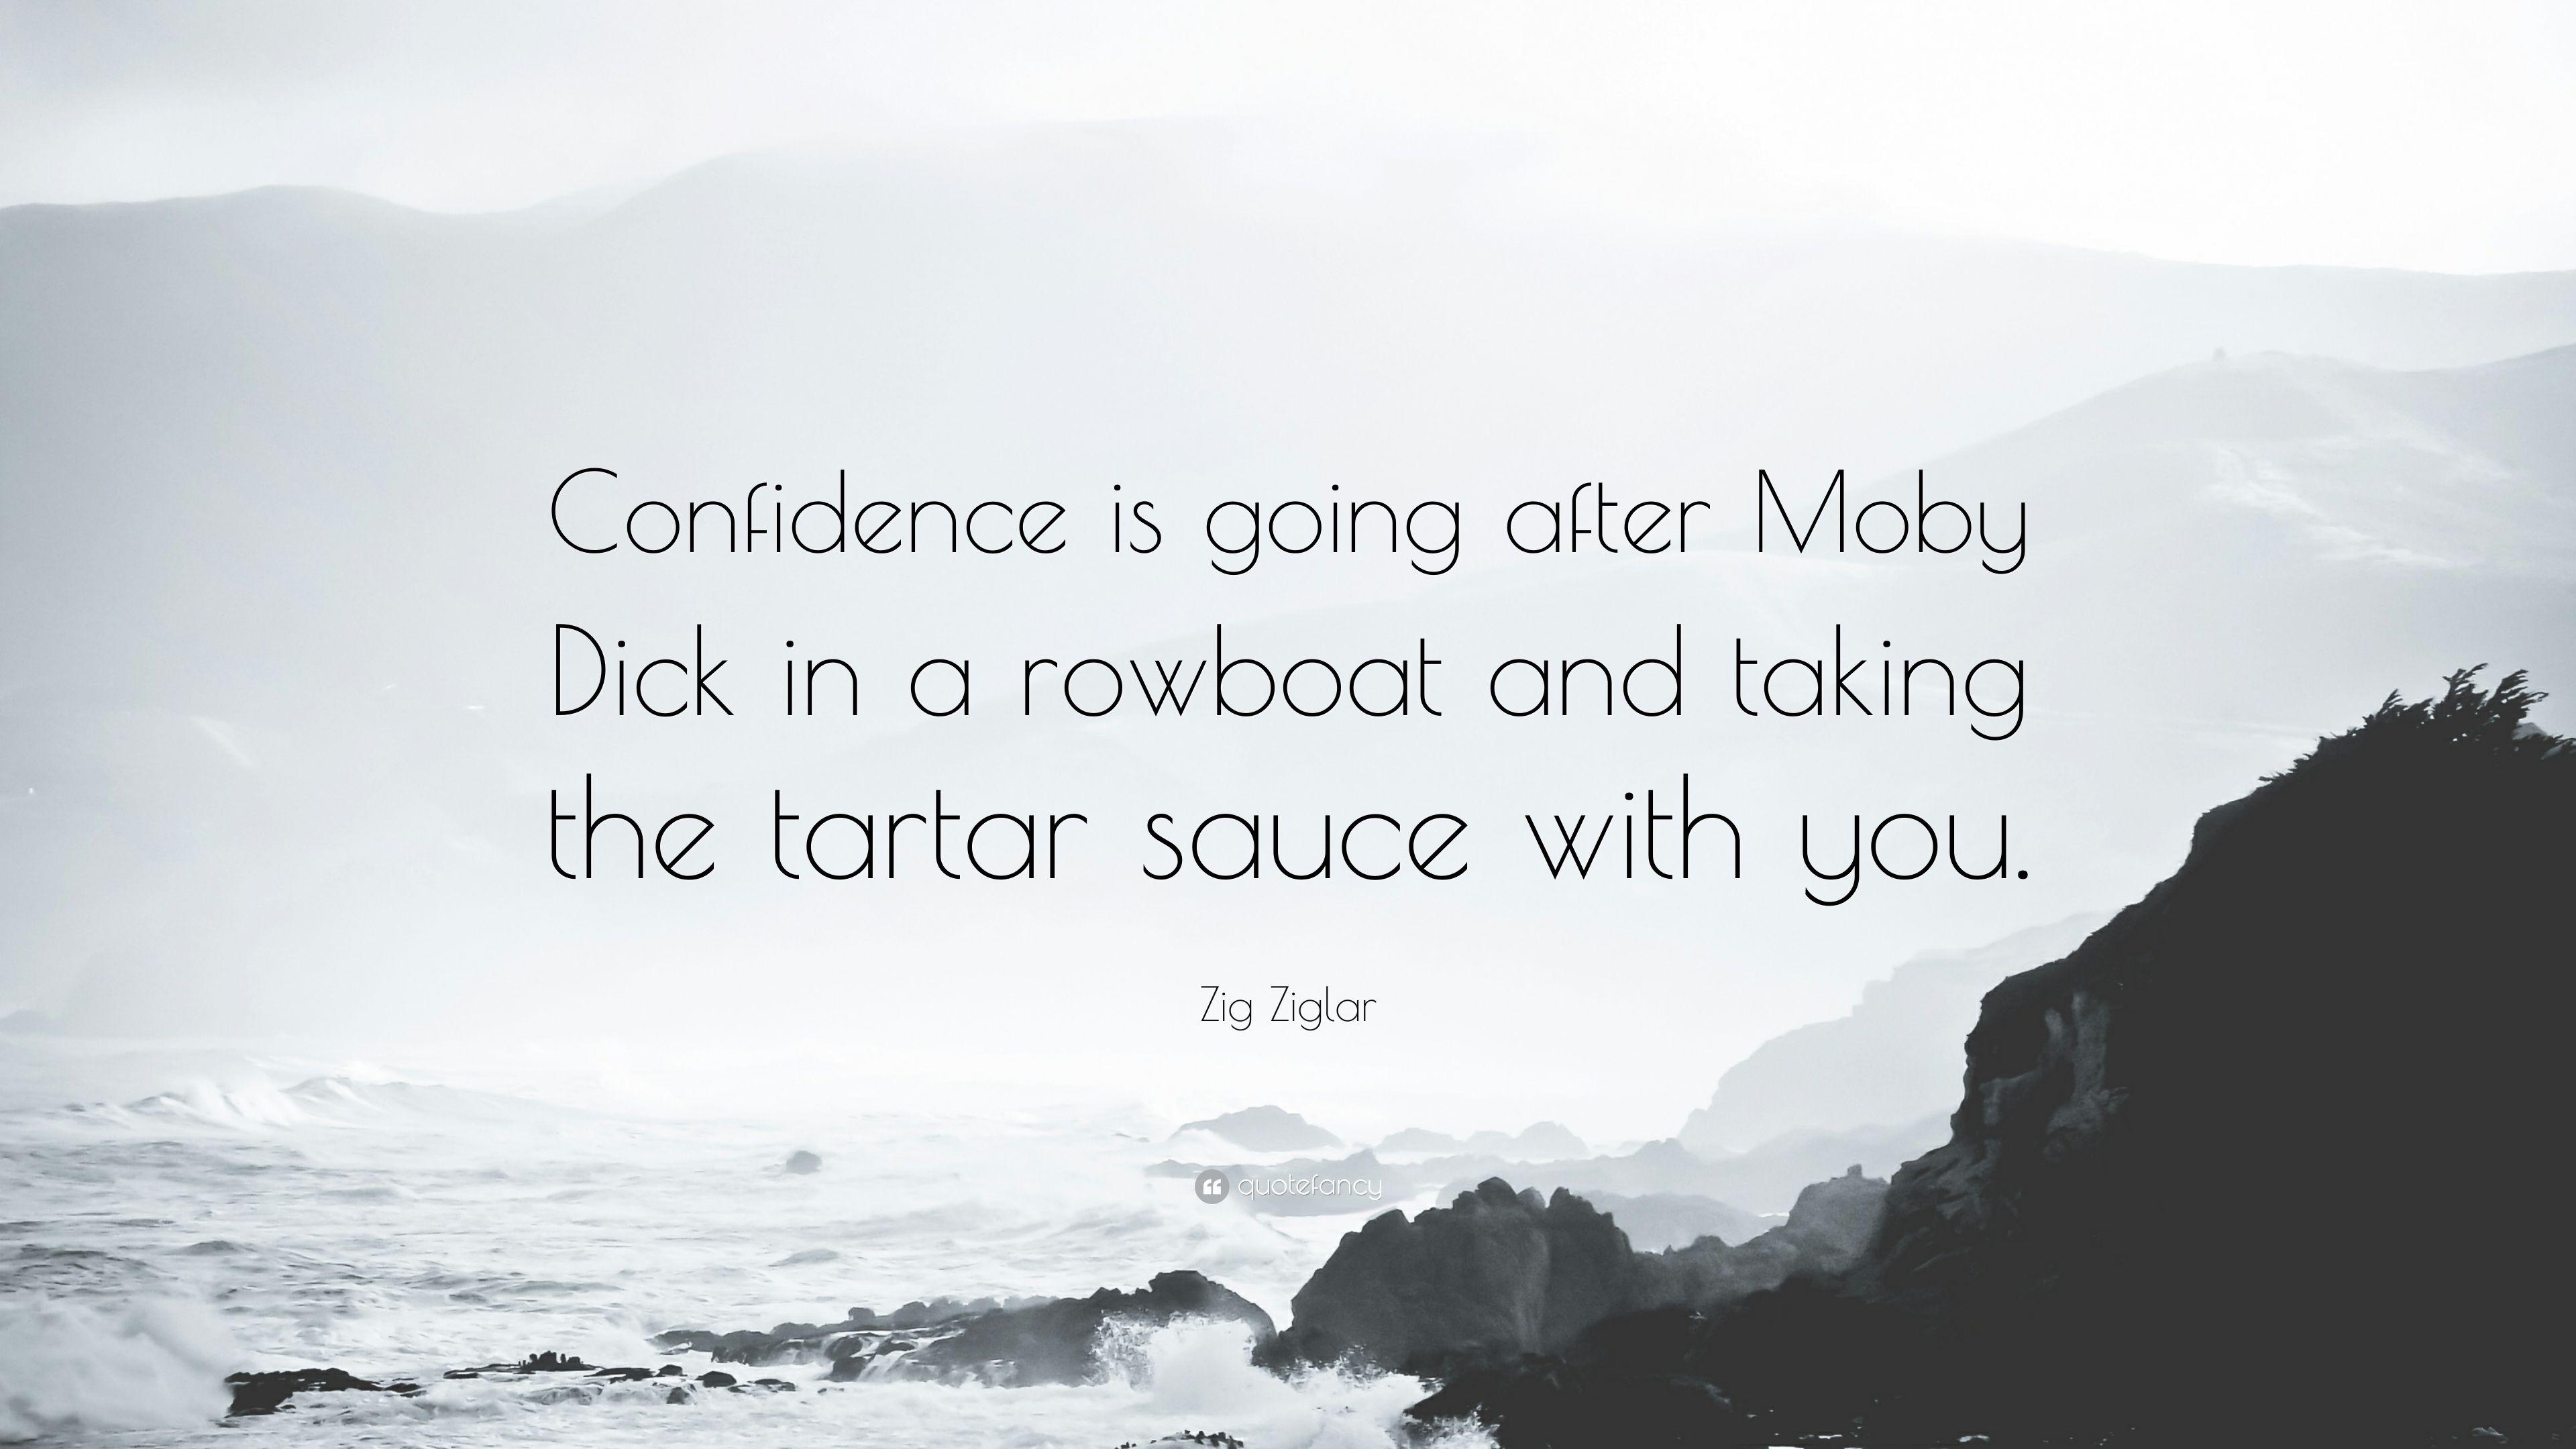 Zig Ziglar Quote: “Confidence is going after Moby Dick in a